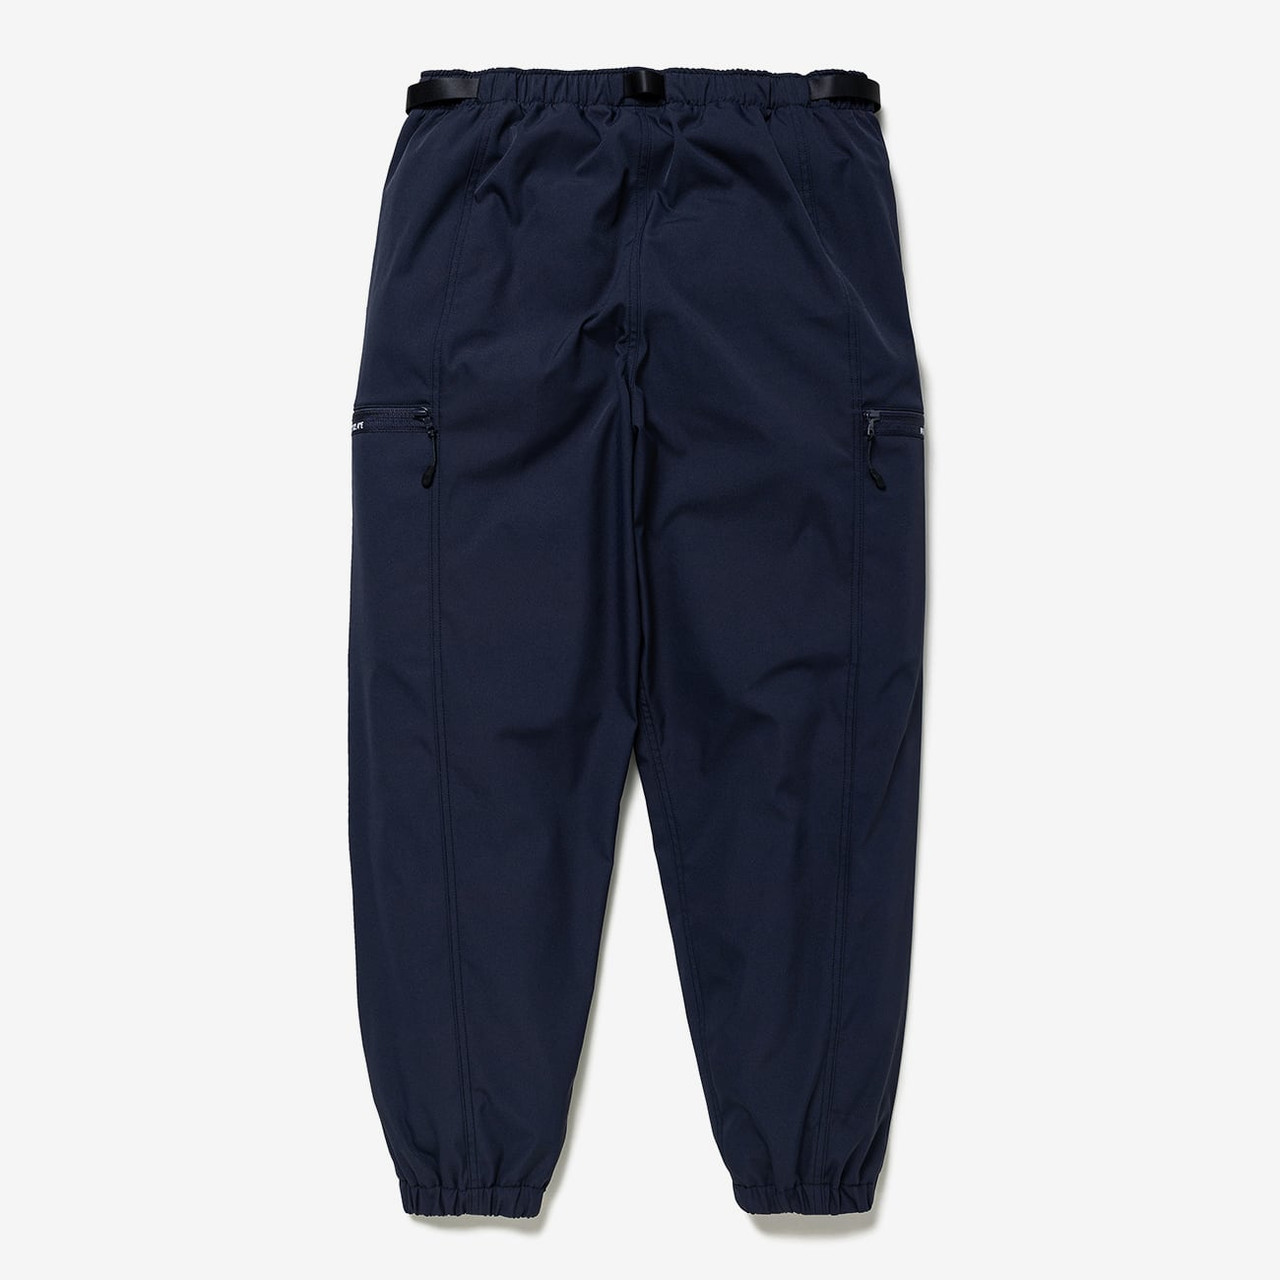 tracks / trousers / poly. twill 231brdt-ptm02 - WTAPS